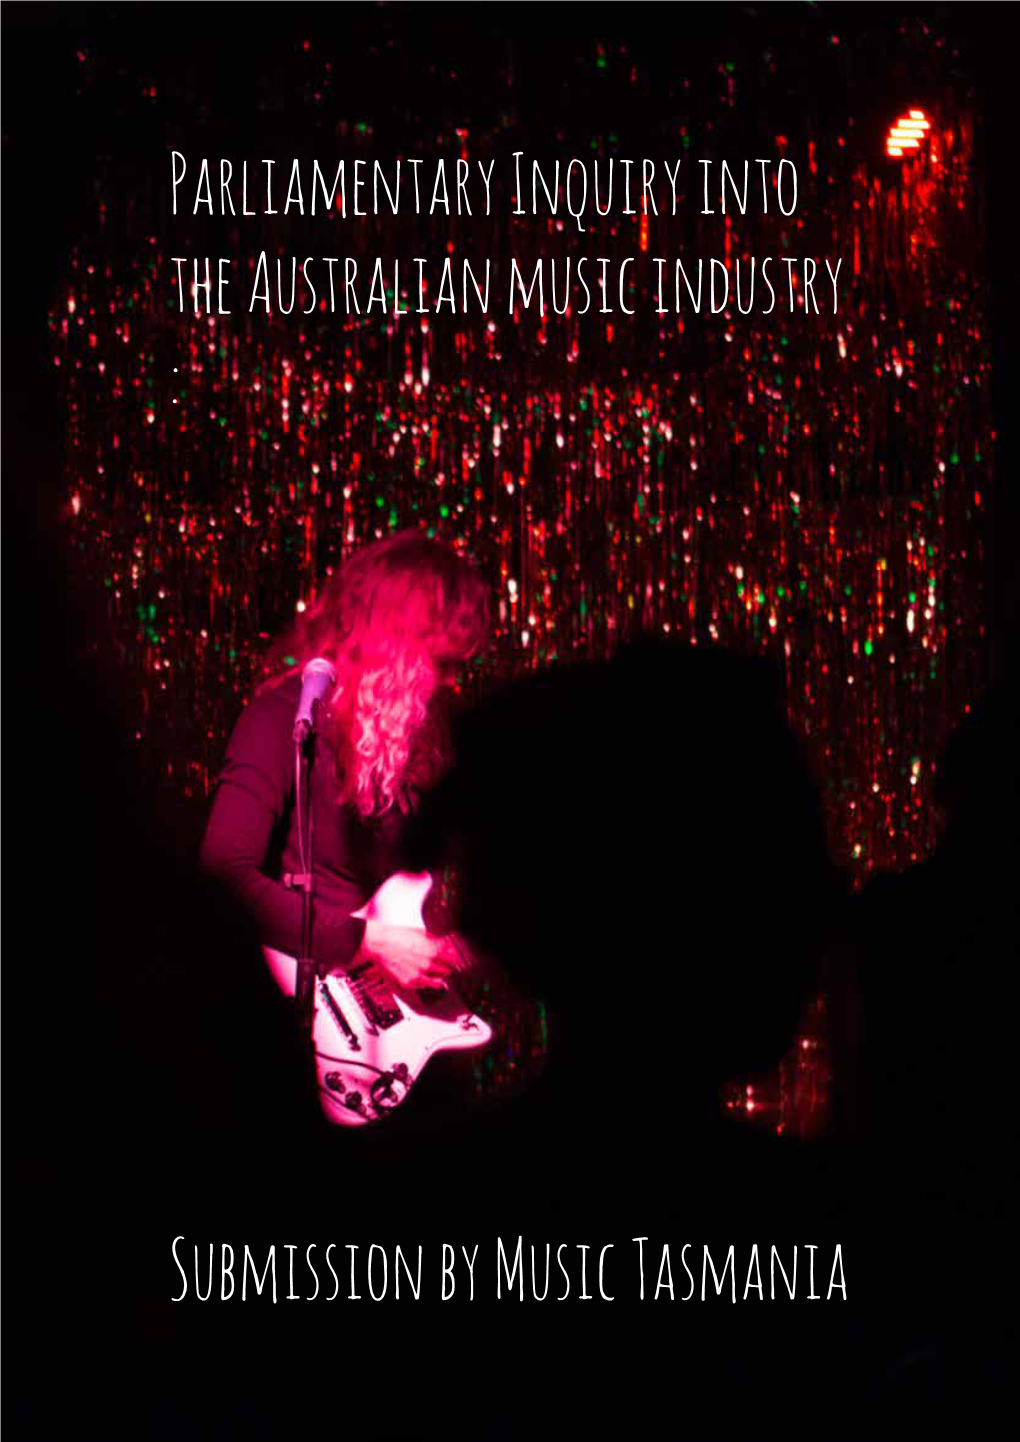 Parliamentary Inquiry Into the Australian Music Industry